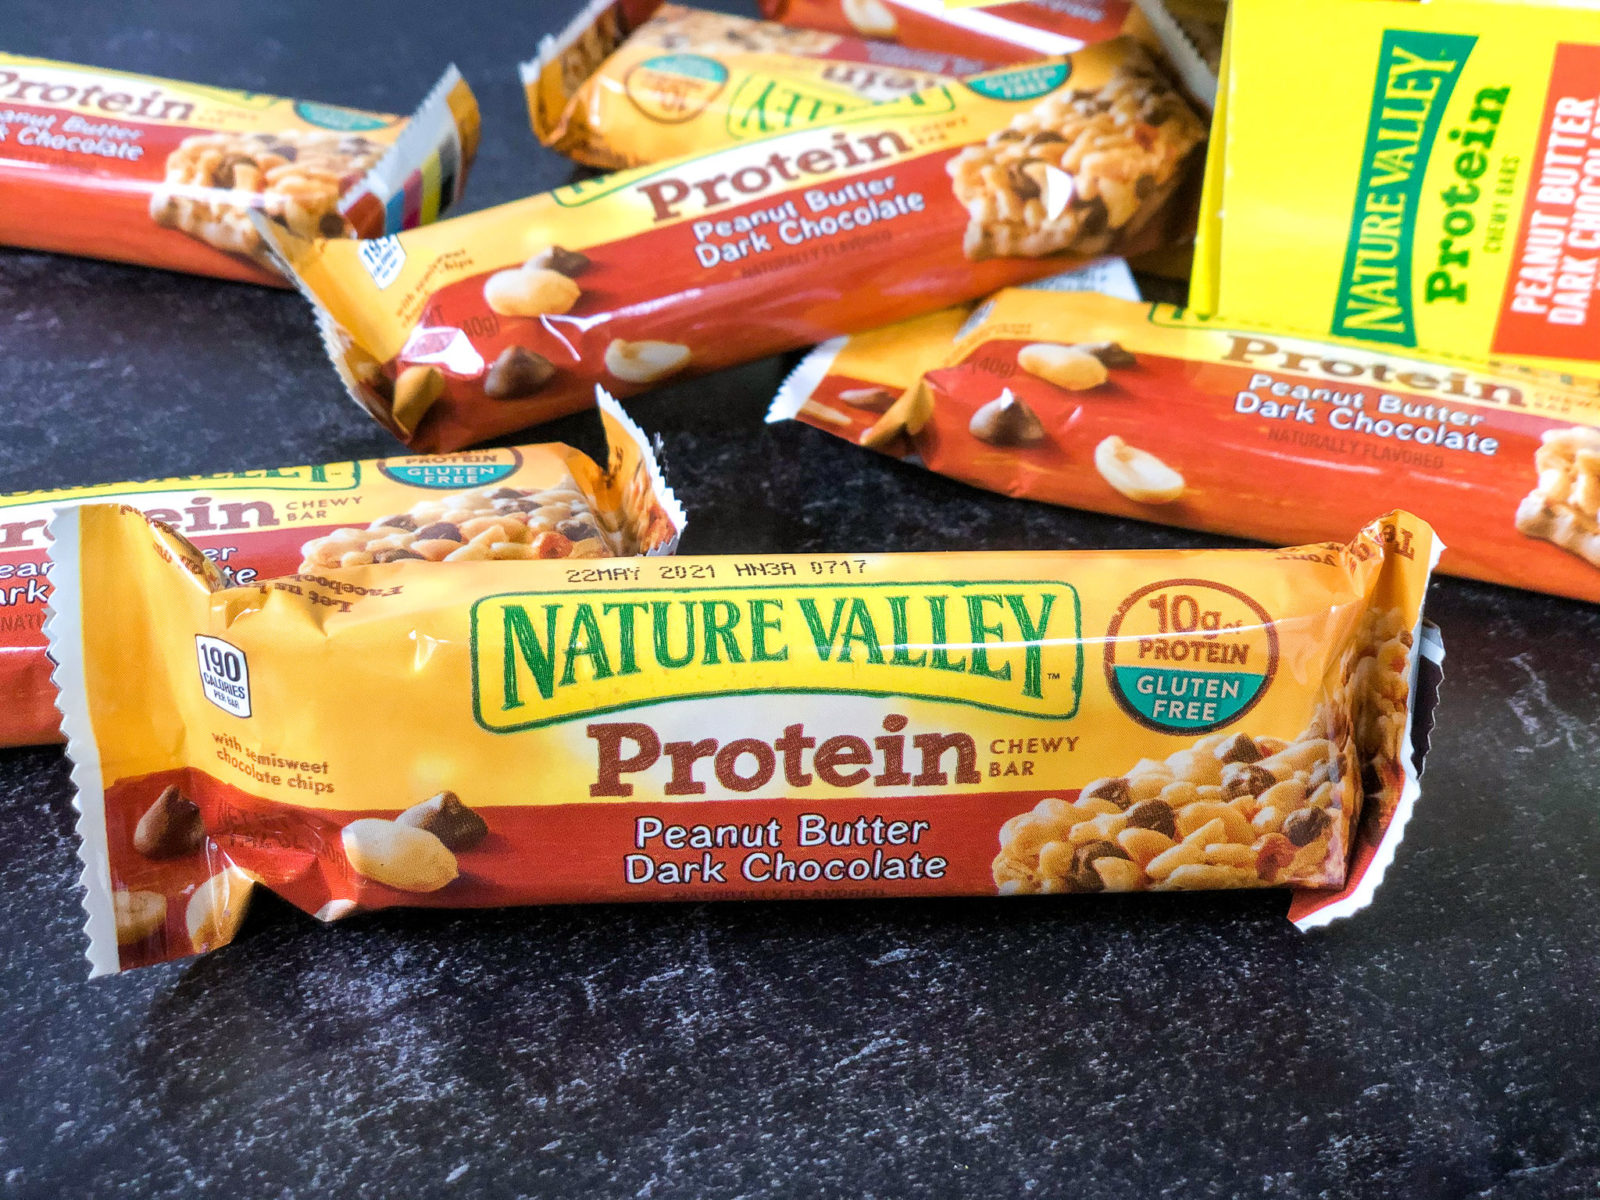 Nature Valley Bars As Low As $2.34 At Kroger